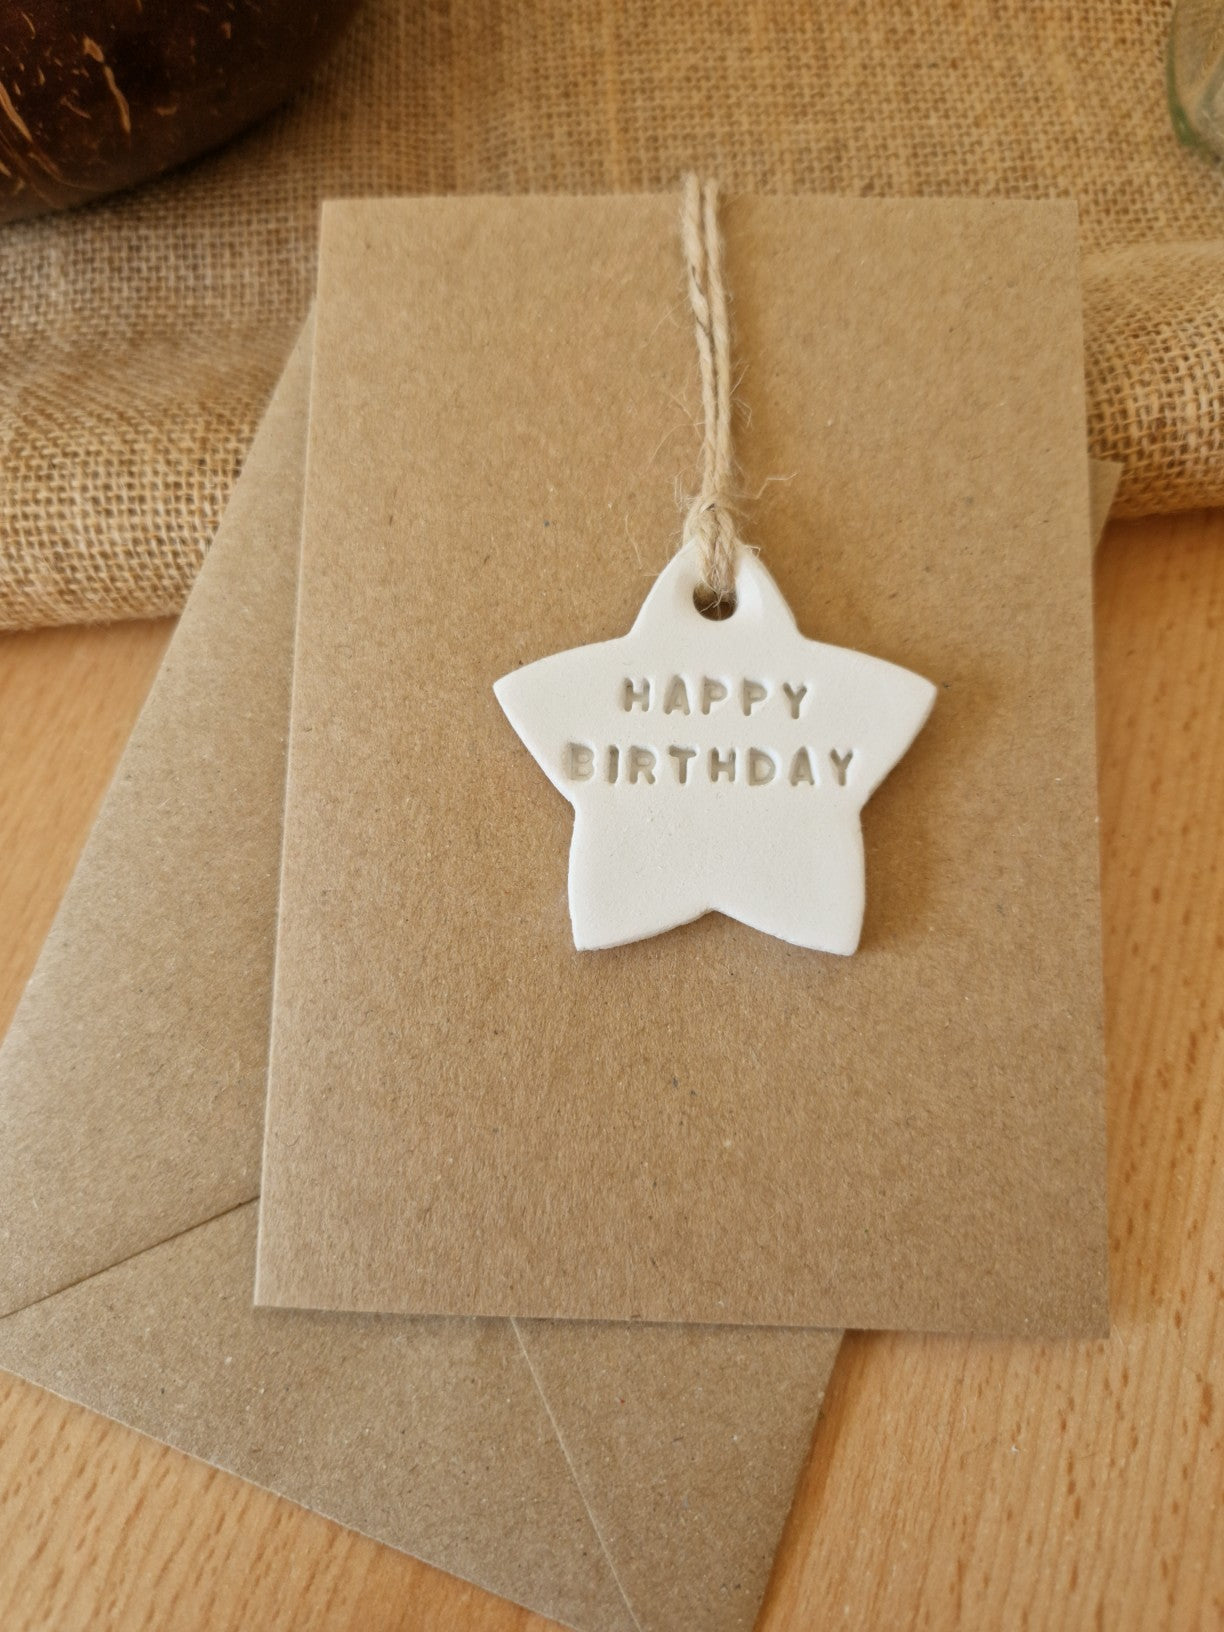 Thank you and Happy Birthday Caly Keepsake Cards, Polymer Clay star decoration personalised.